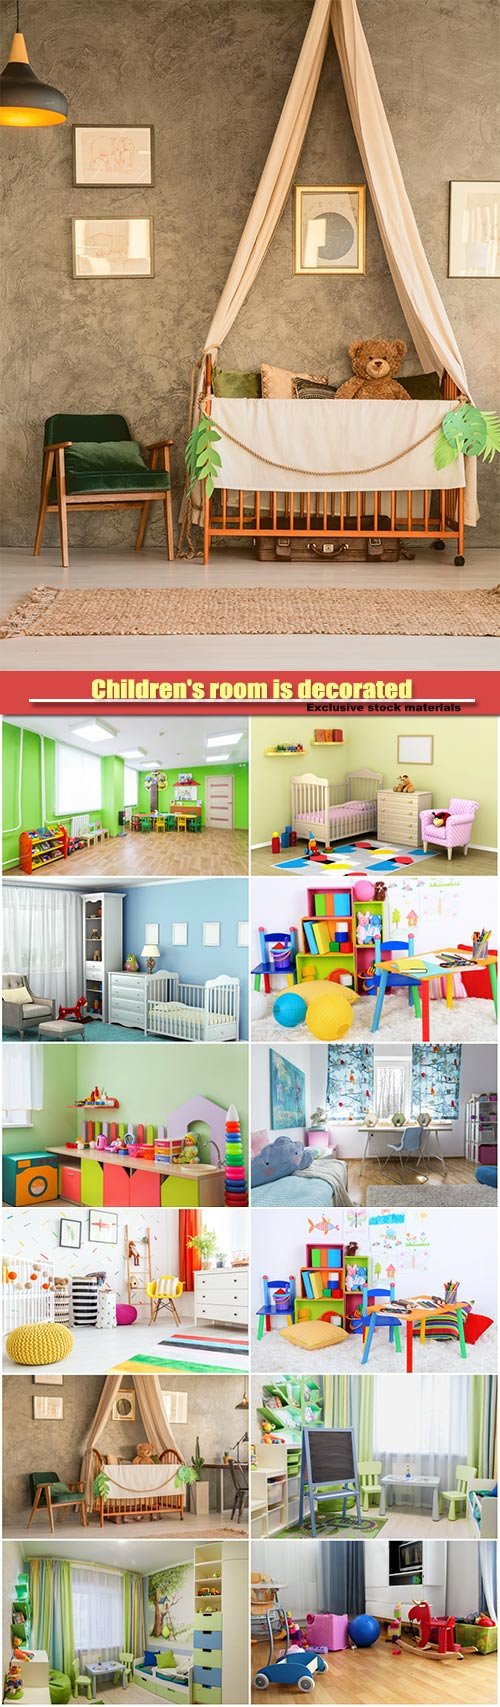 Children's room is decorated